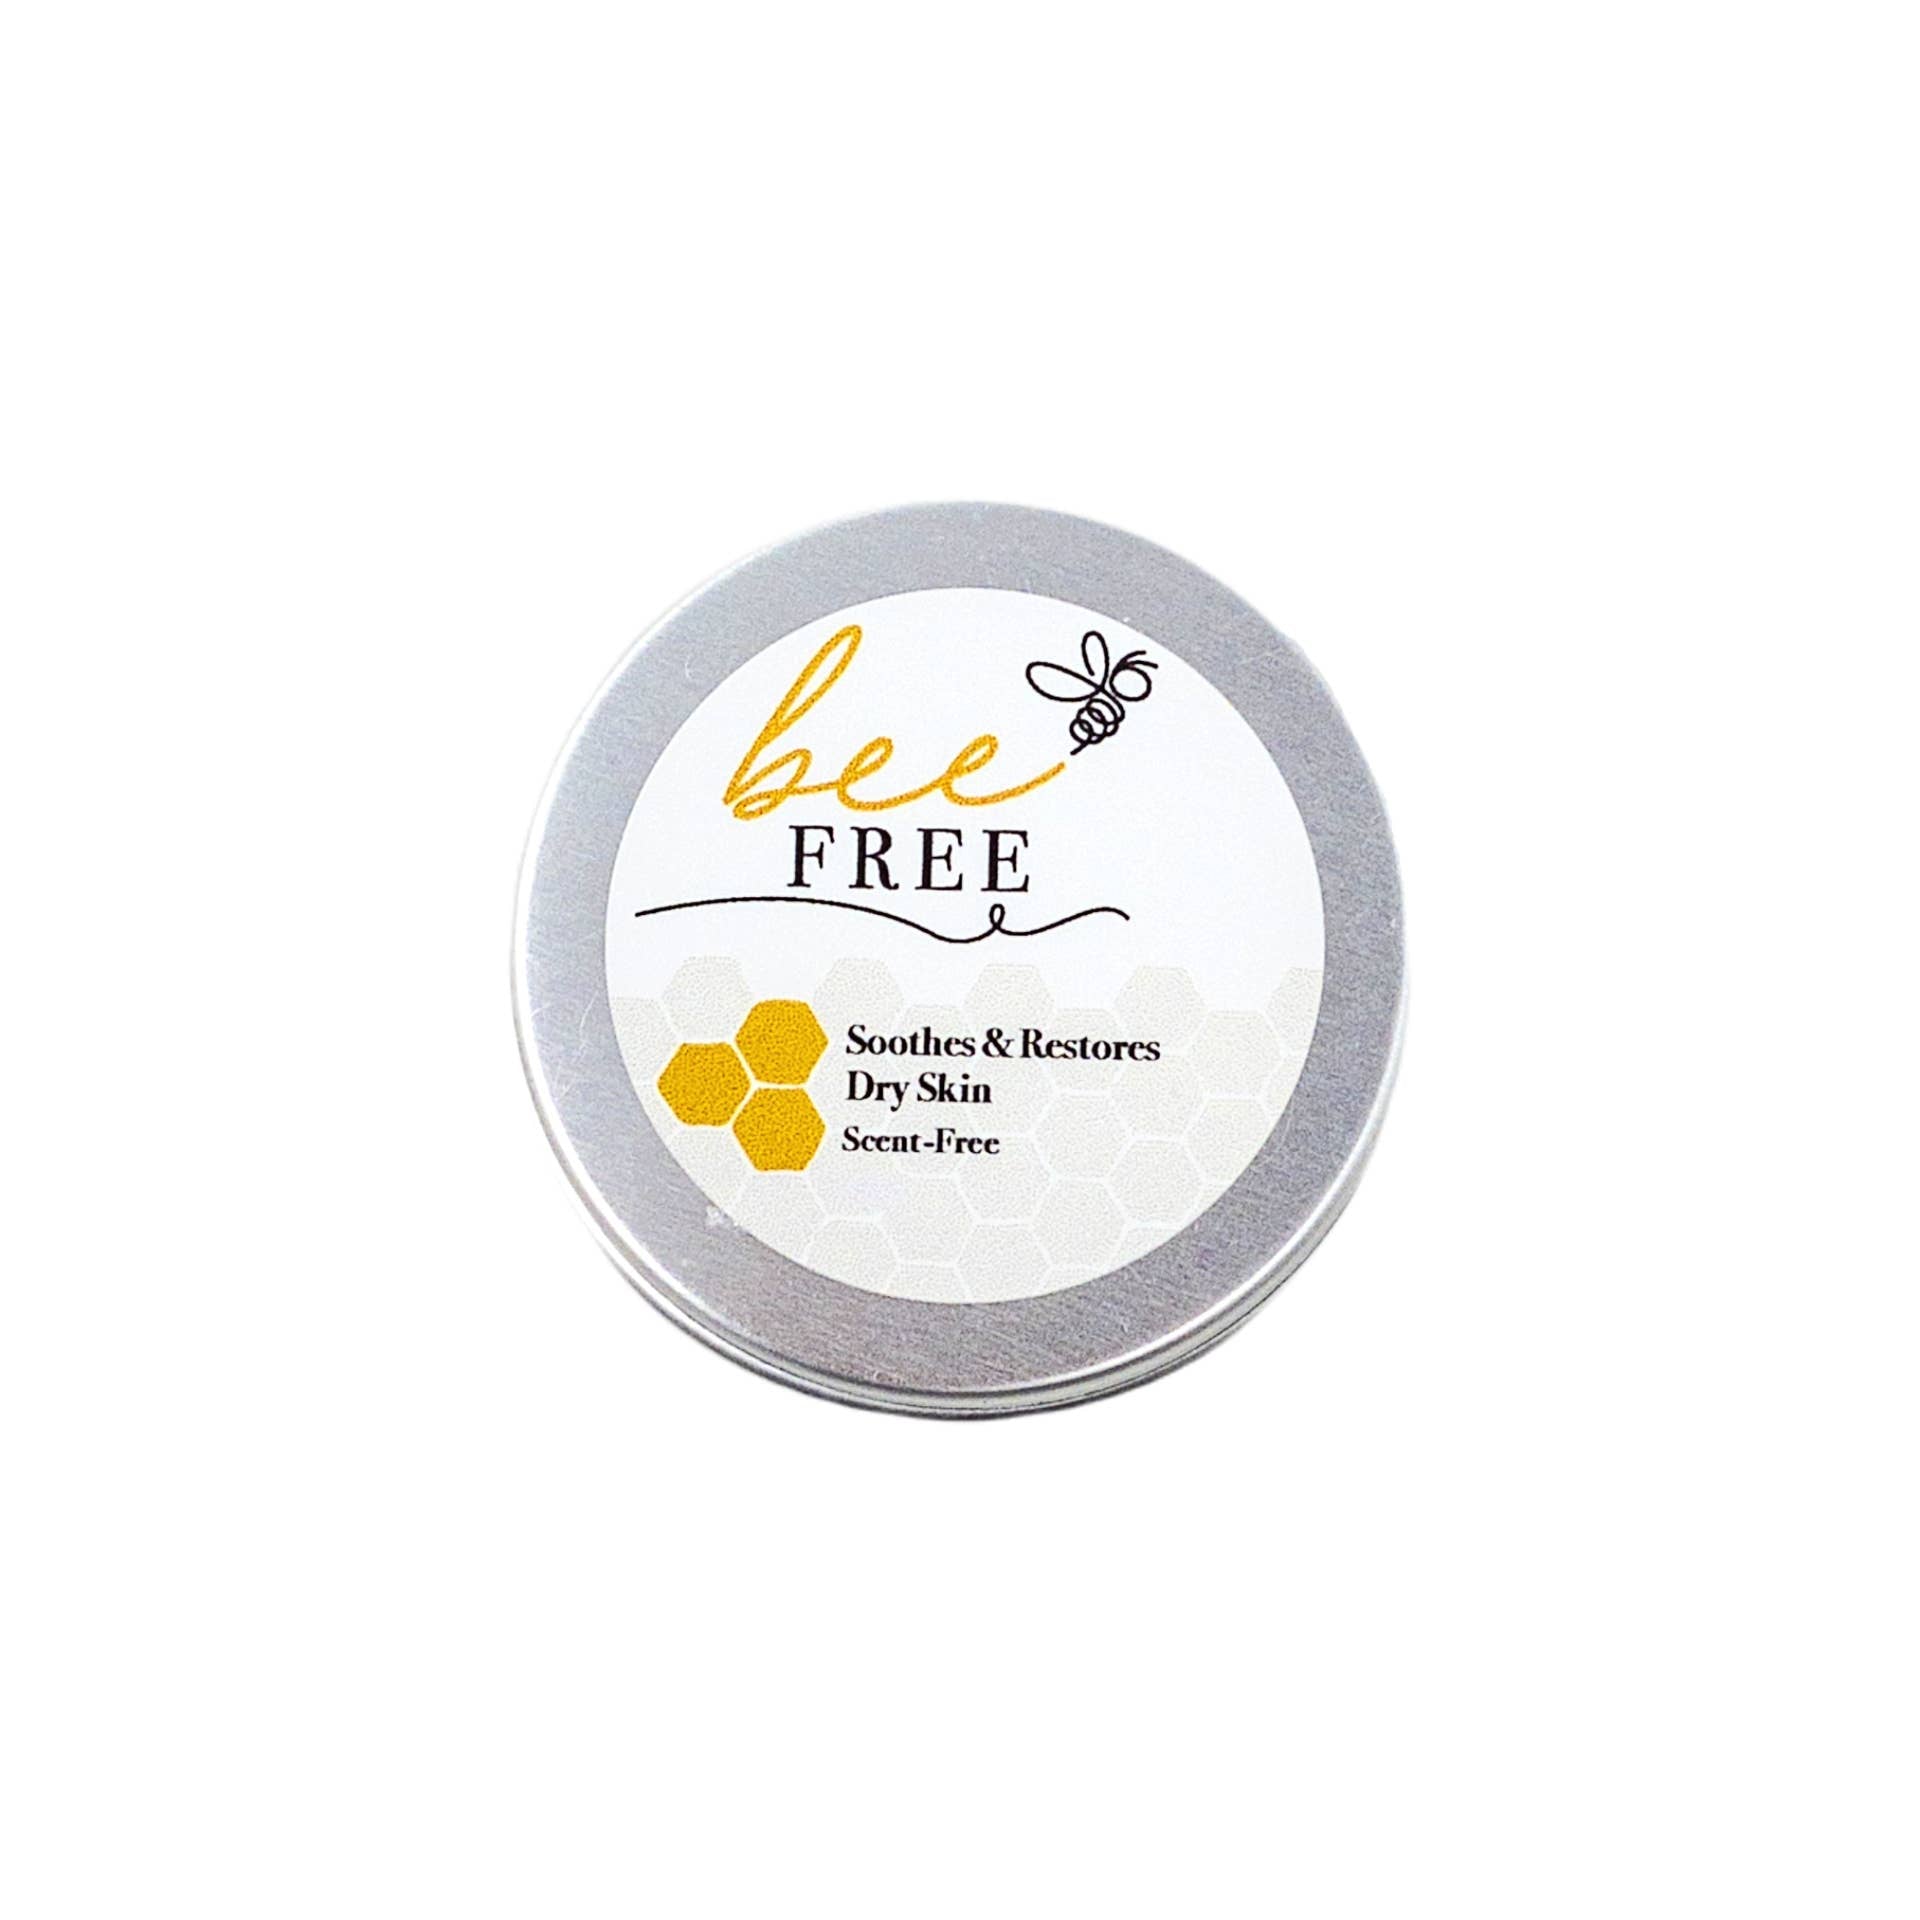 Bee On the go! HIS and HER Moisturizer Travel Tins